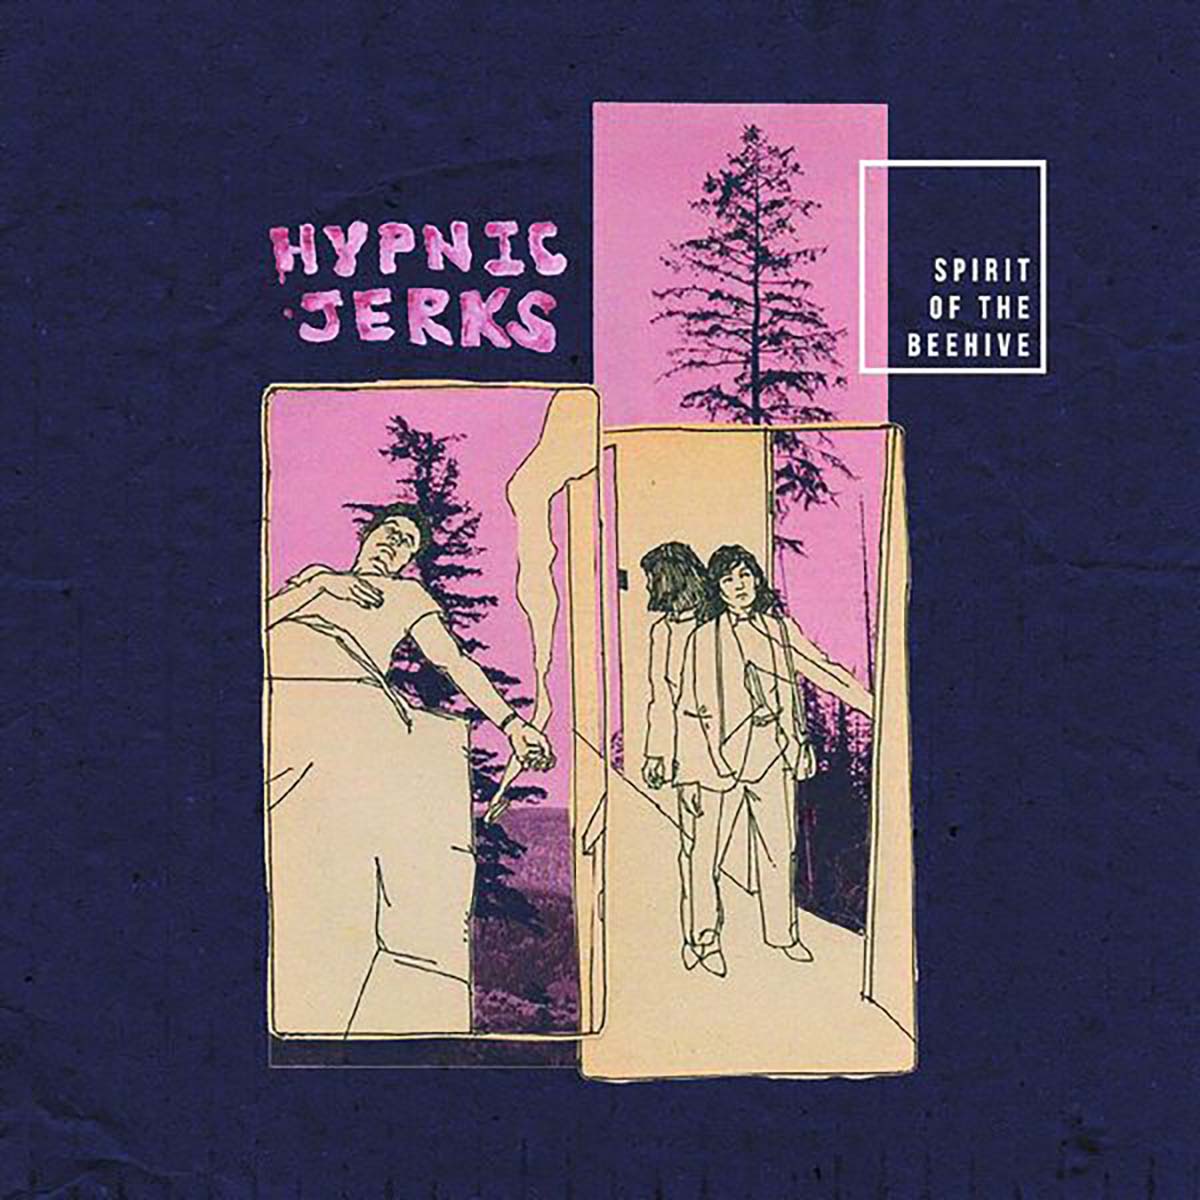 The SPIRIT OF THE BEEHIVE 'HYPNIC JERKS'